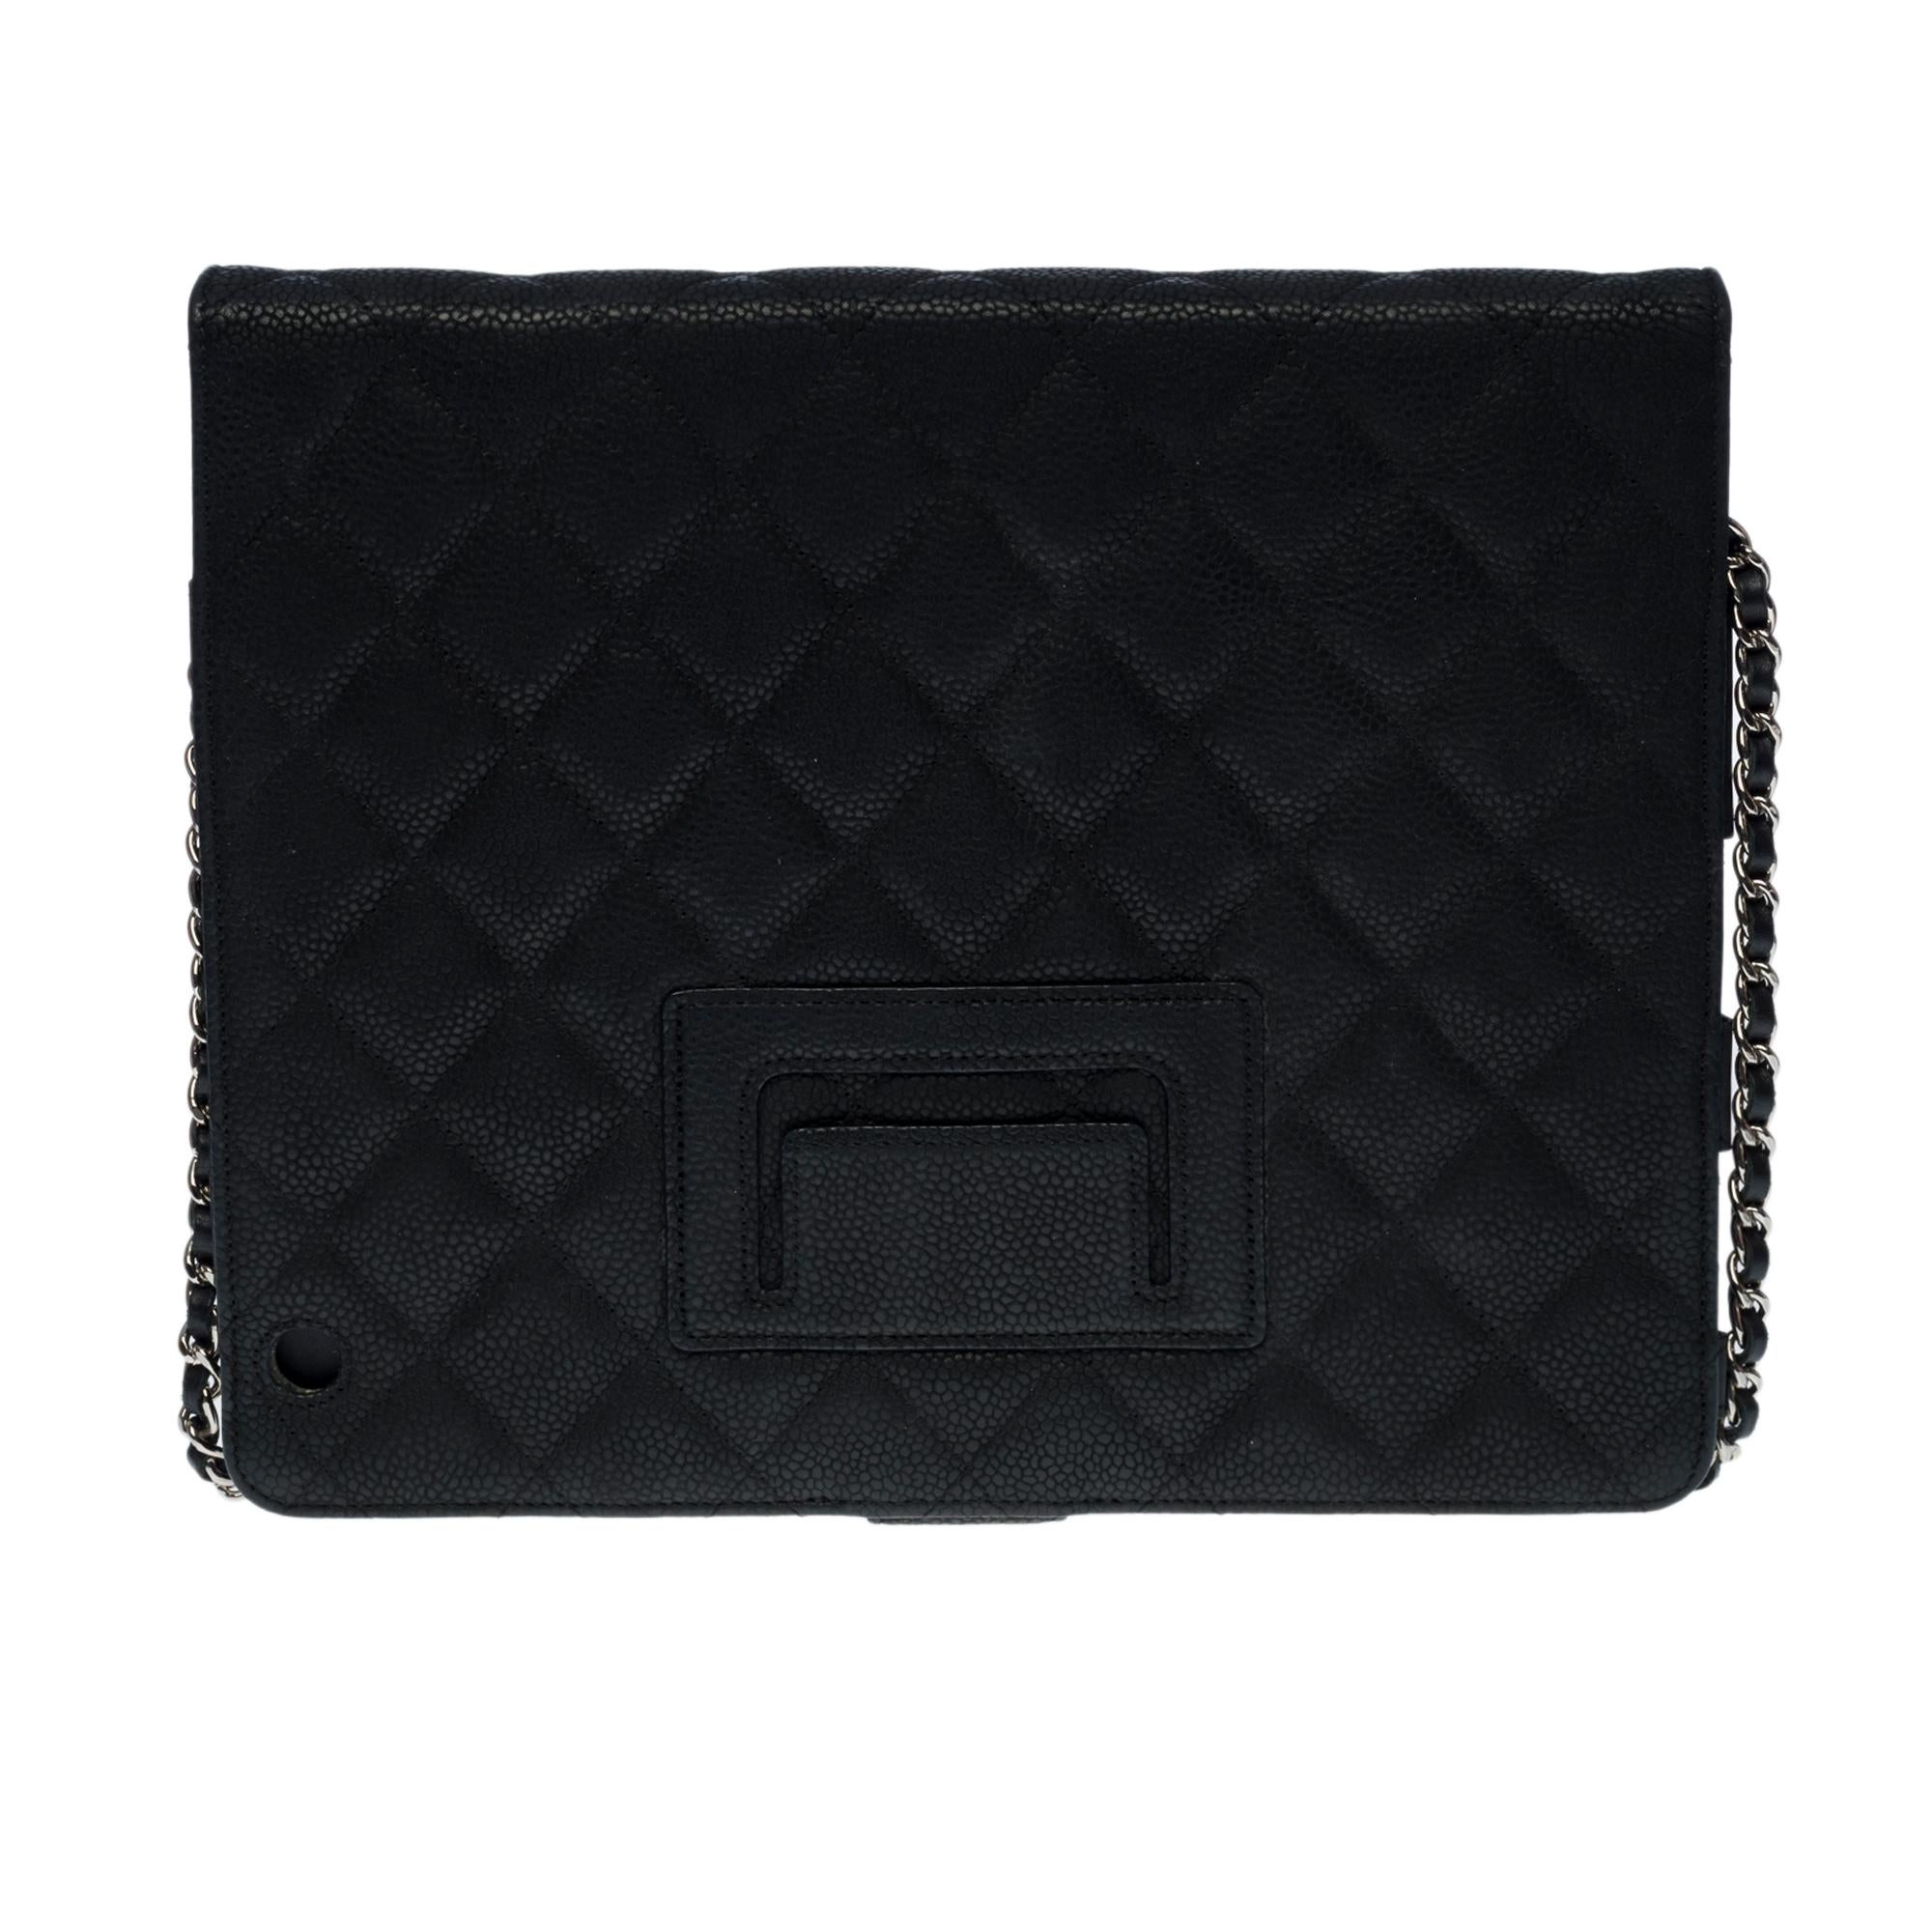 Beautiful Chanel Ipad/Tablet pouch in black mattified caviar leather, palladium silver hardware, a removable chain handle in palladium silver interlaced with black leather allowing a shoulder and shoulder strap
Flap closure, palladium-silvered CC